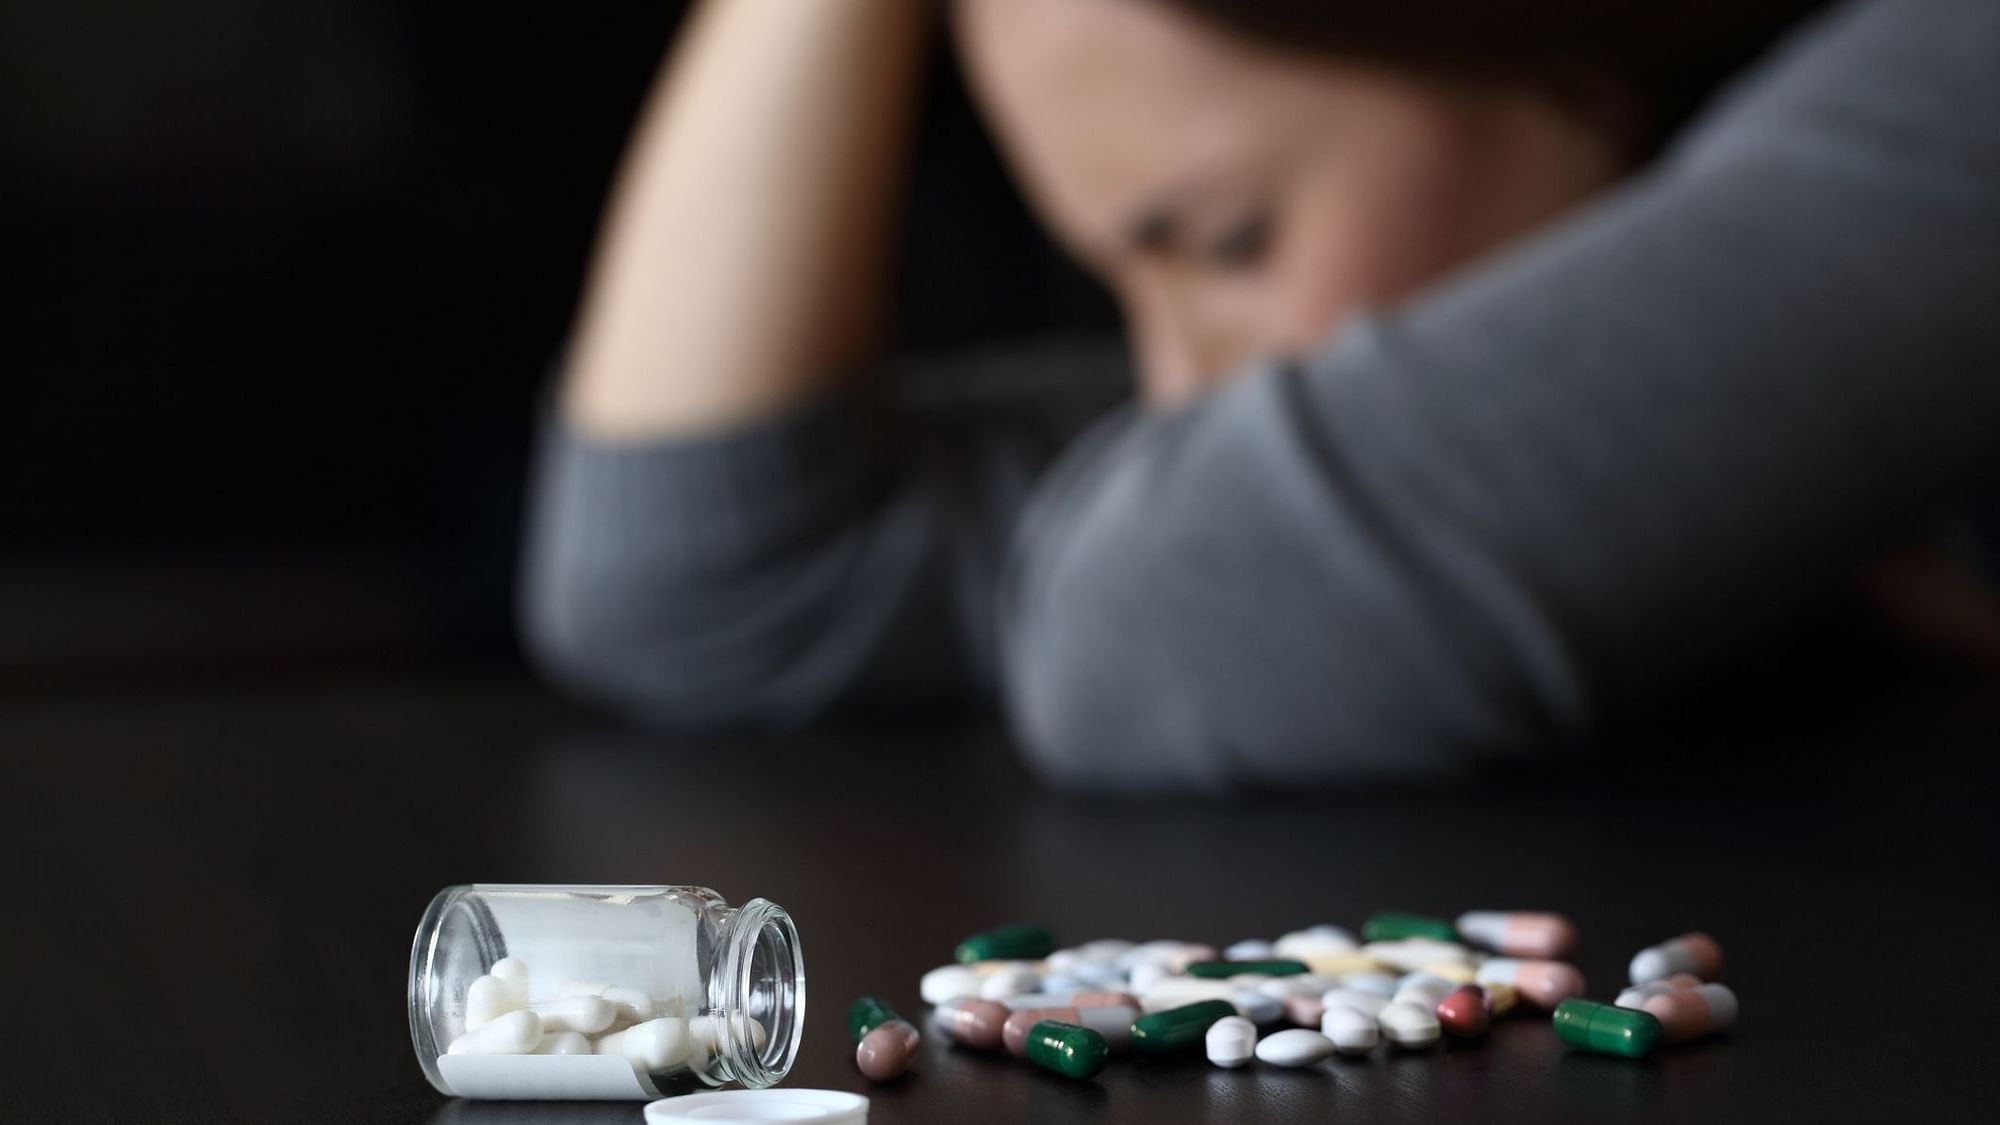 The number of teenagers taking and overdosing anxiety medications, has risen dramatically over the past decade.